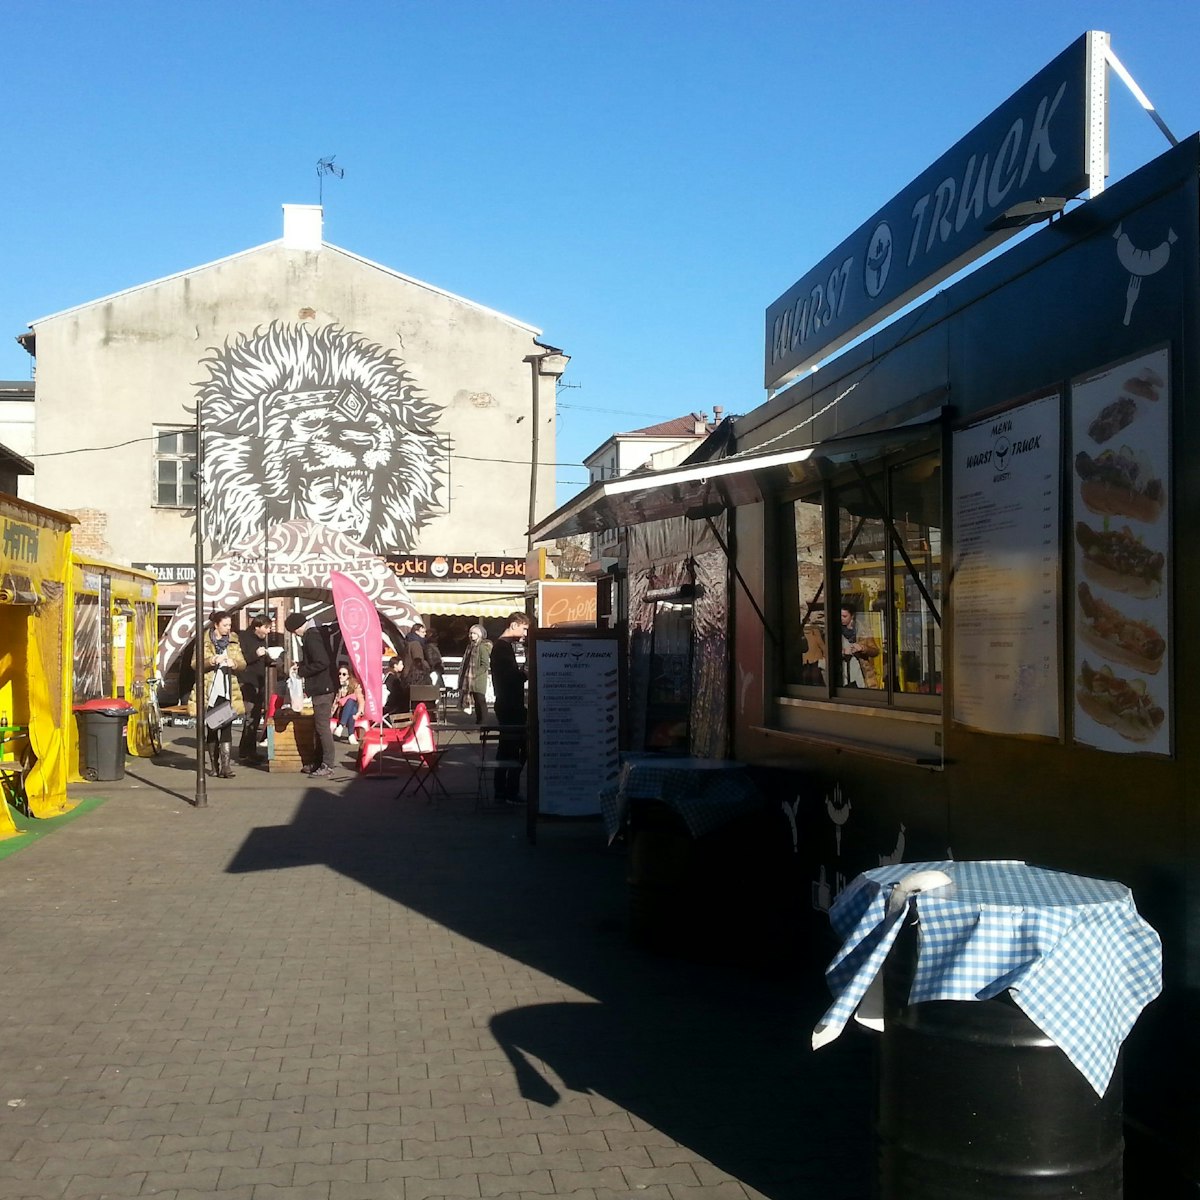 Skwer Judah, open from lunch until dark, there is lots to offer at these food trucks